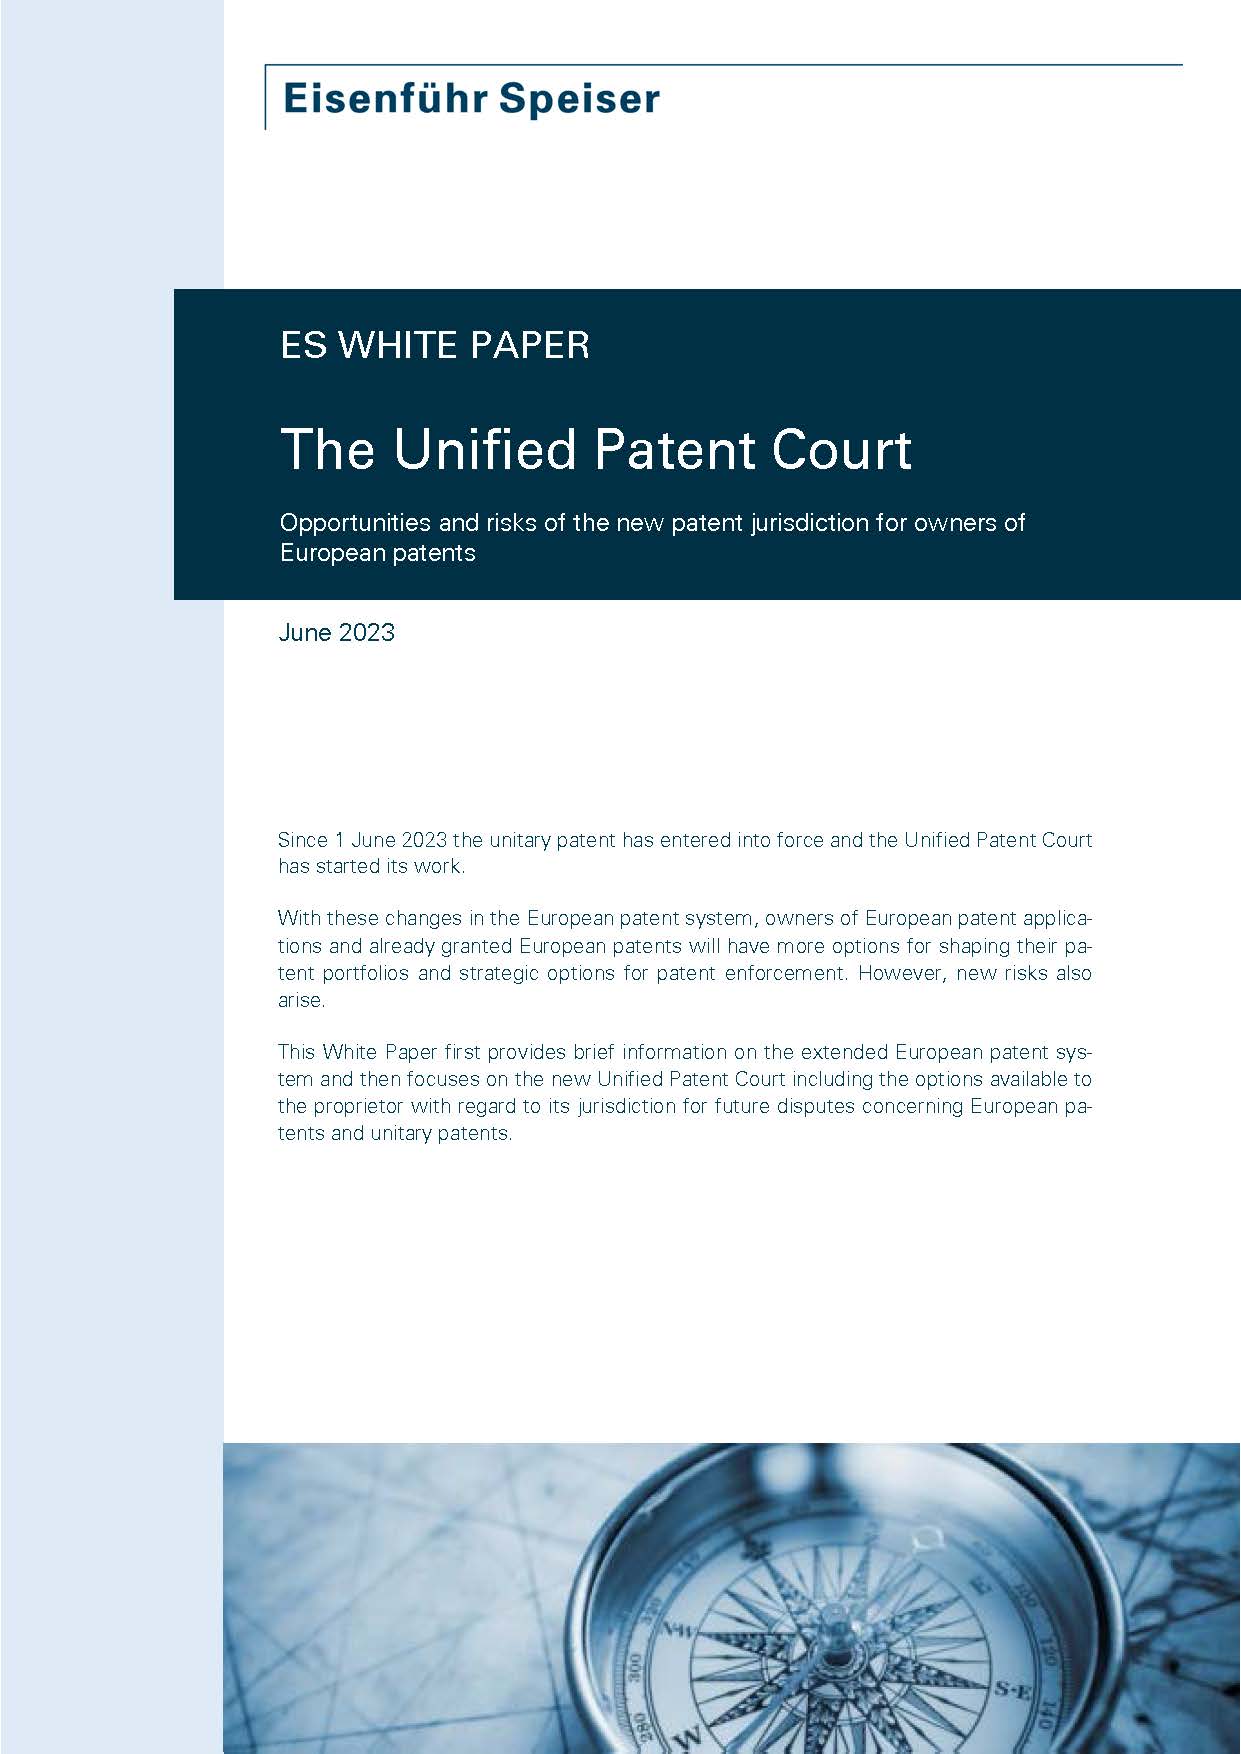 The Unified Patent Court